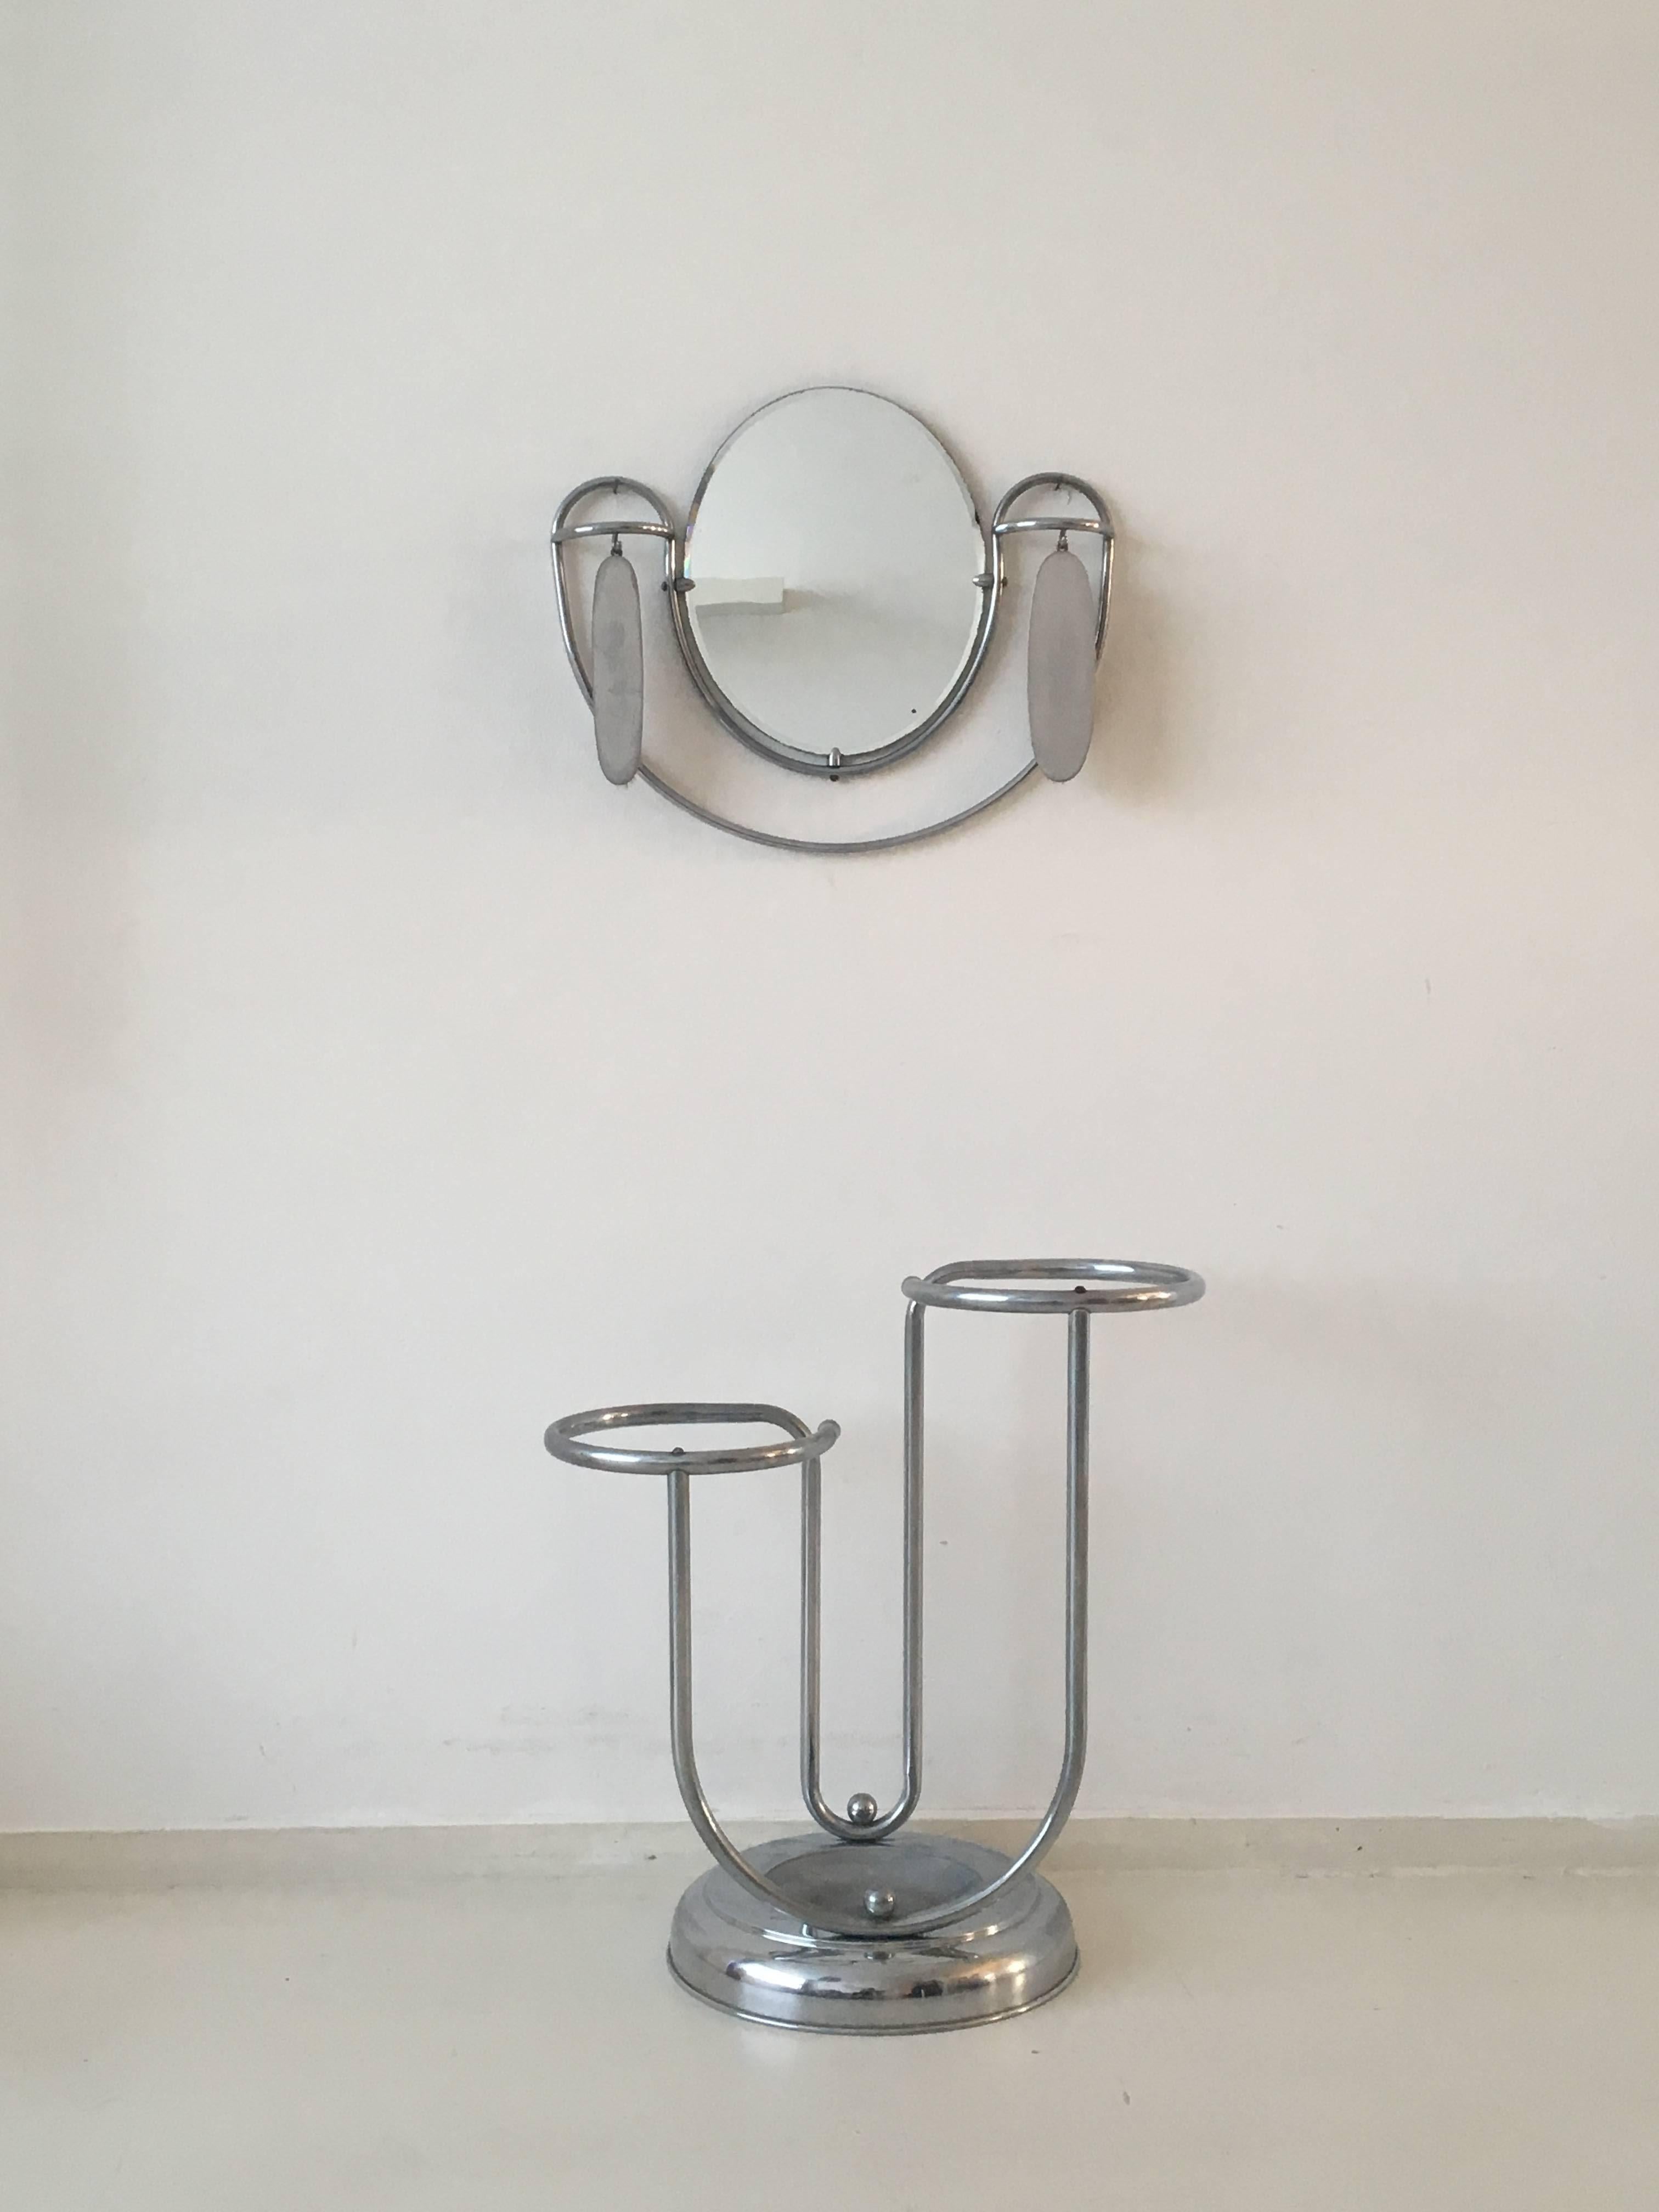 Amazing set, consisting of a tubular chrome umbrella stand and a mirror with beveled glass and with two brushes. Gispen, Bauhaus era. This set was manufactured, circa 1920s-1930s in France. It remains in very good condition and rarely found as a